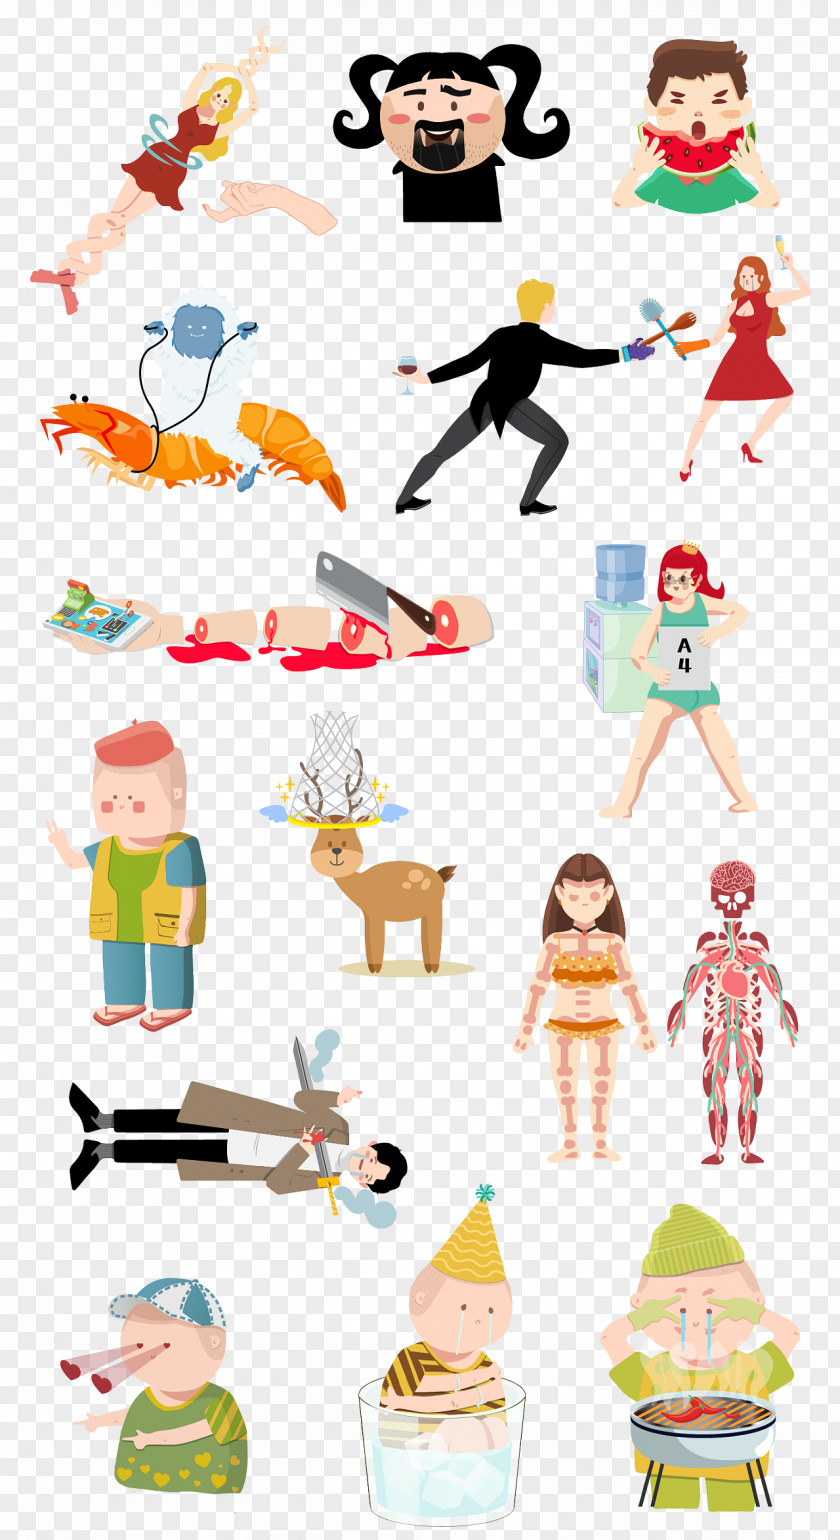 Endemic Clip Art Illustration Graphic Design Product Clothing Accessories PNG